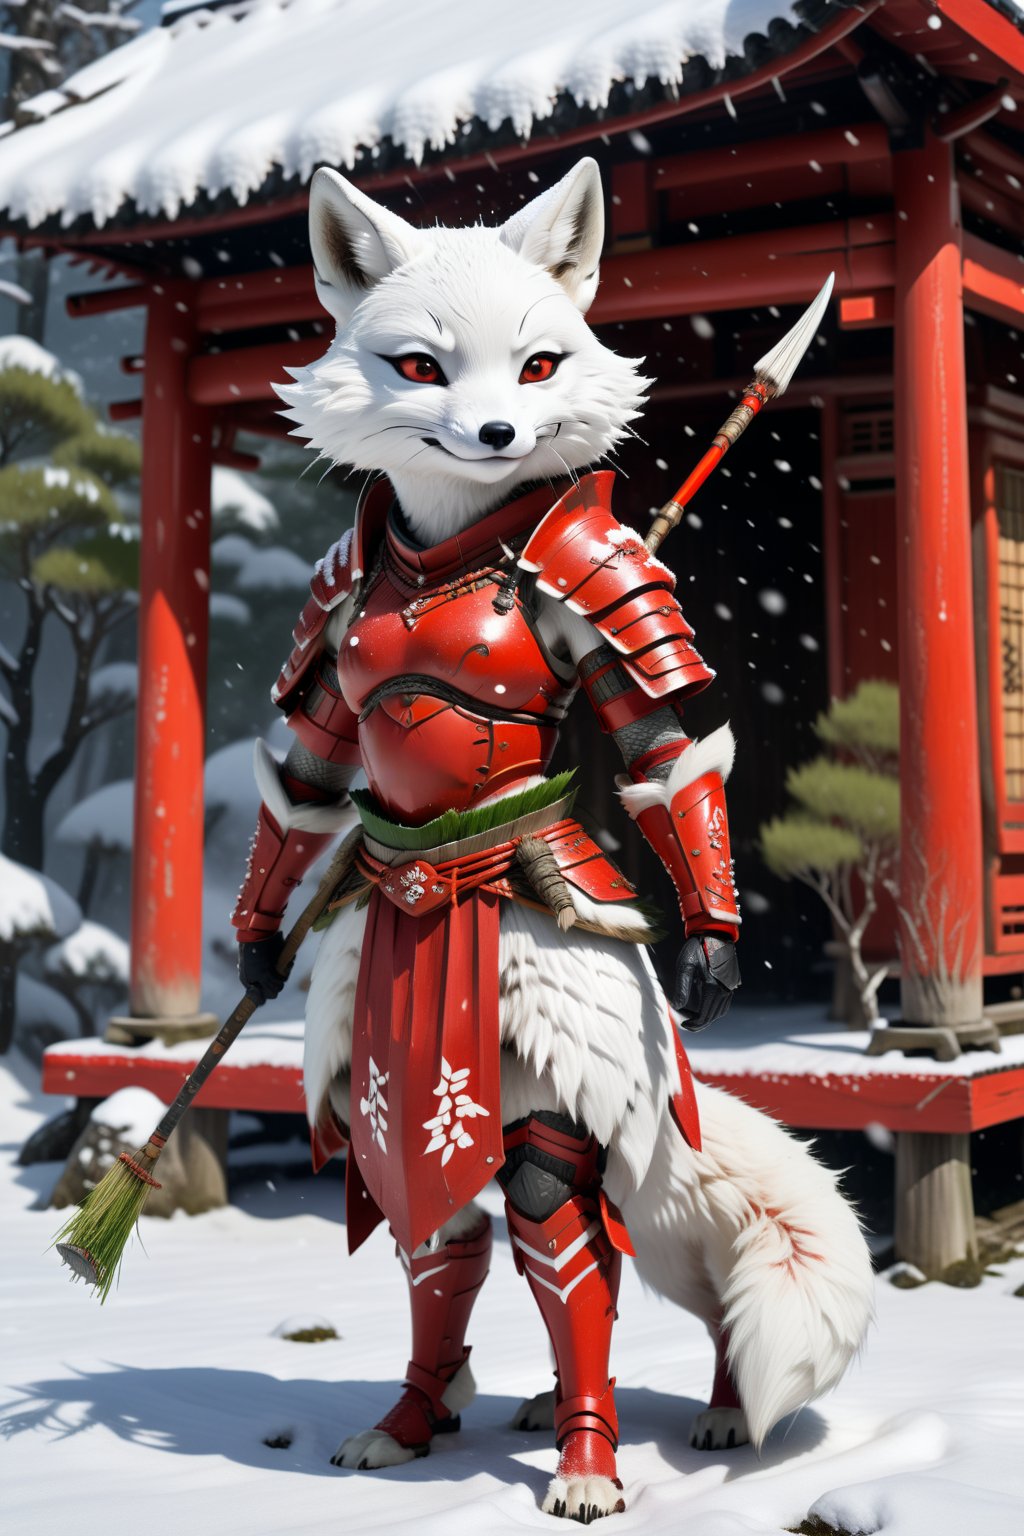 The avatar of a white fox has a plump and slender figure of a female human, holding grass in its mouth, wearing red simple armor, standing in front of a Japanese hut, holding a spear, the scene is snowing, and there are small snowdrifts on the body